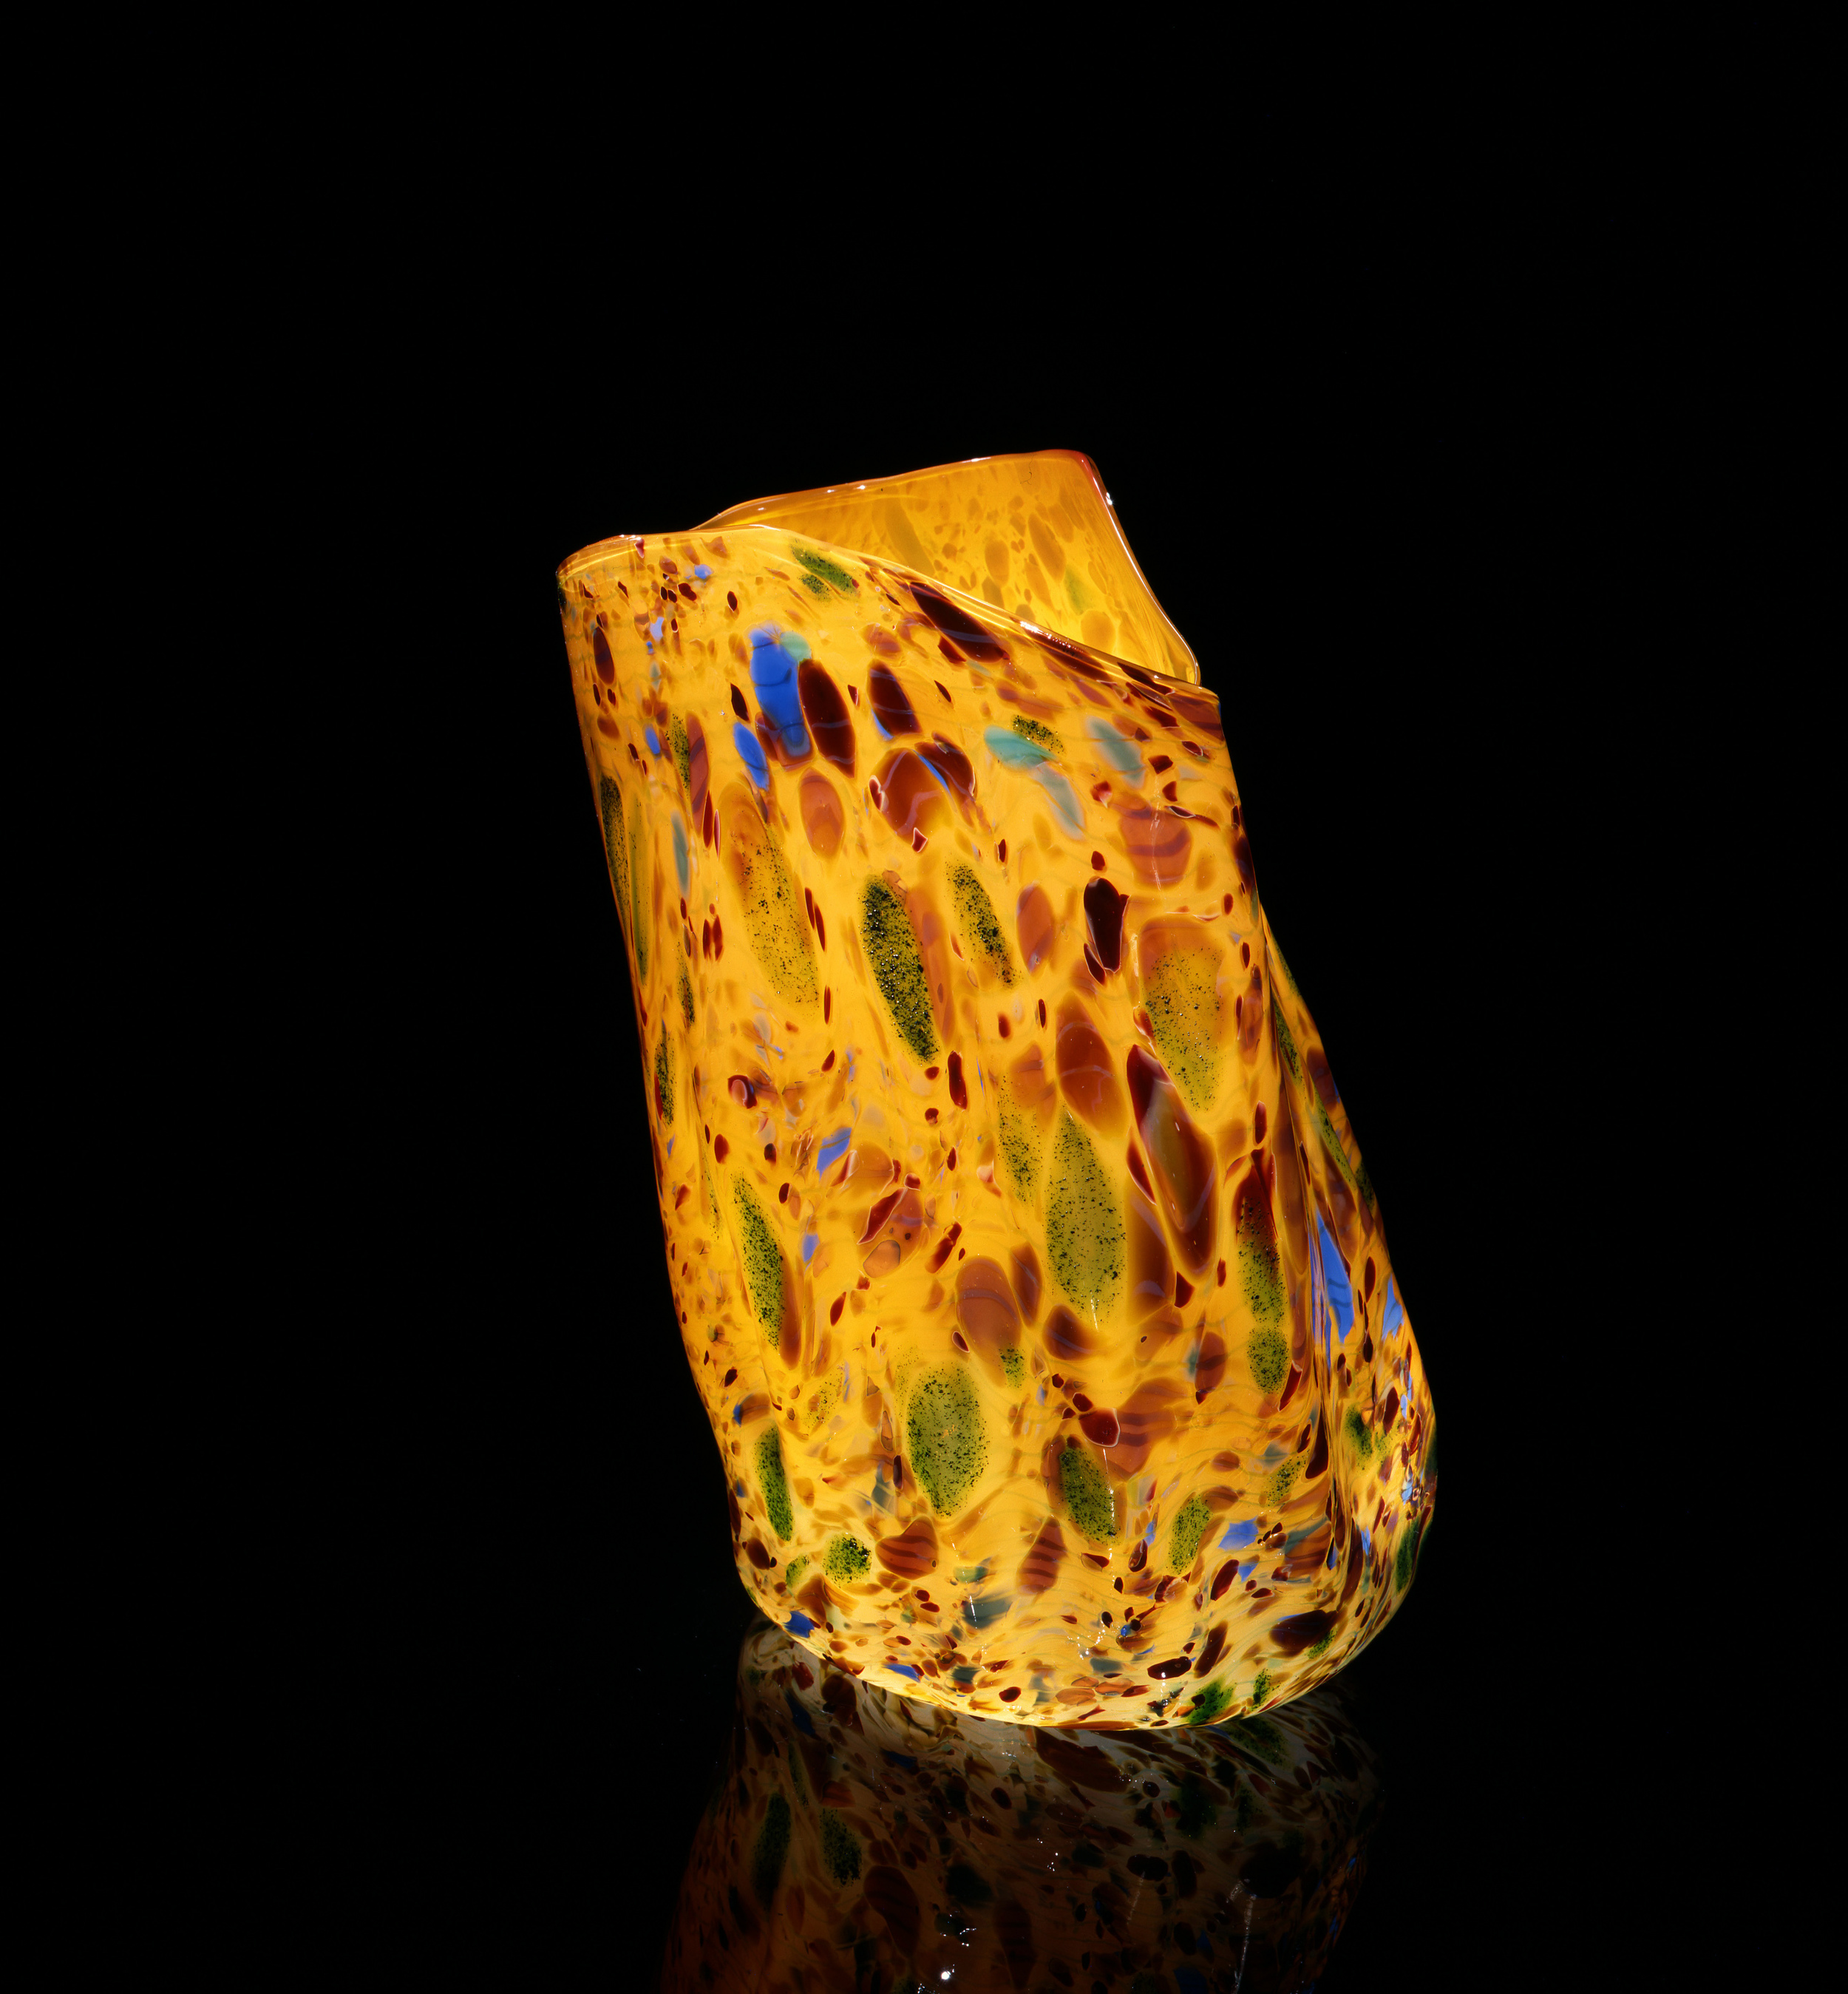  Dale Chihuly, Meridian Yellow Macchia with Blue and Sap Green Jimmies (1981, glass, 14 x 10 x 7 inches), DC.105 